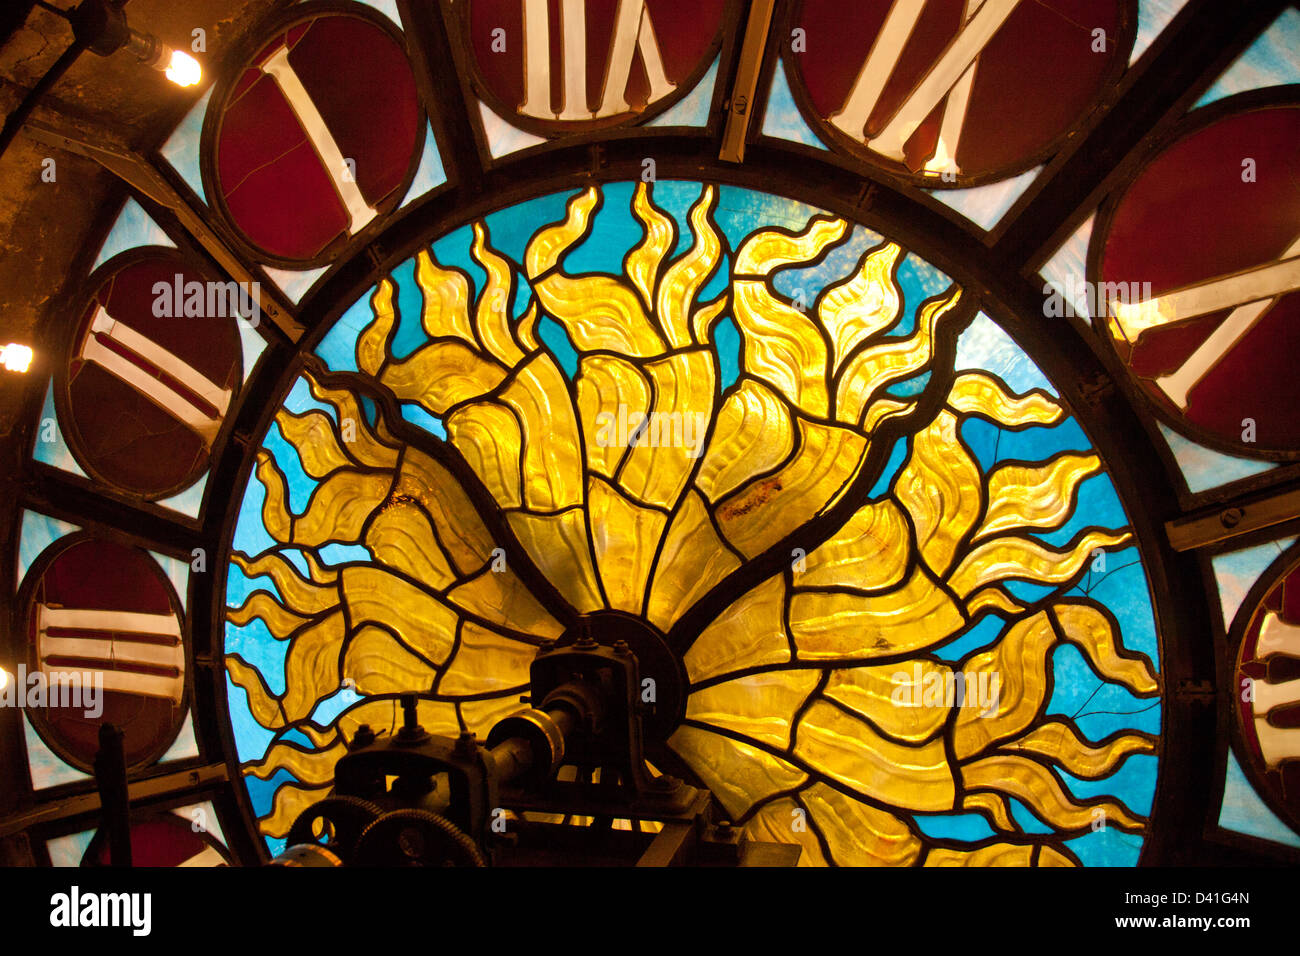 detail of the Tiffany clock interior in Grand Central Station Stock Photo